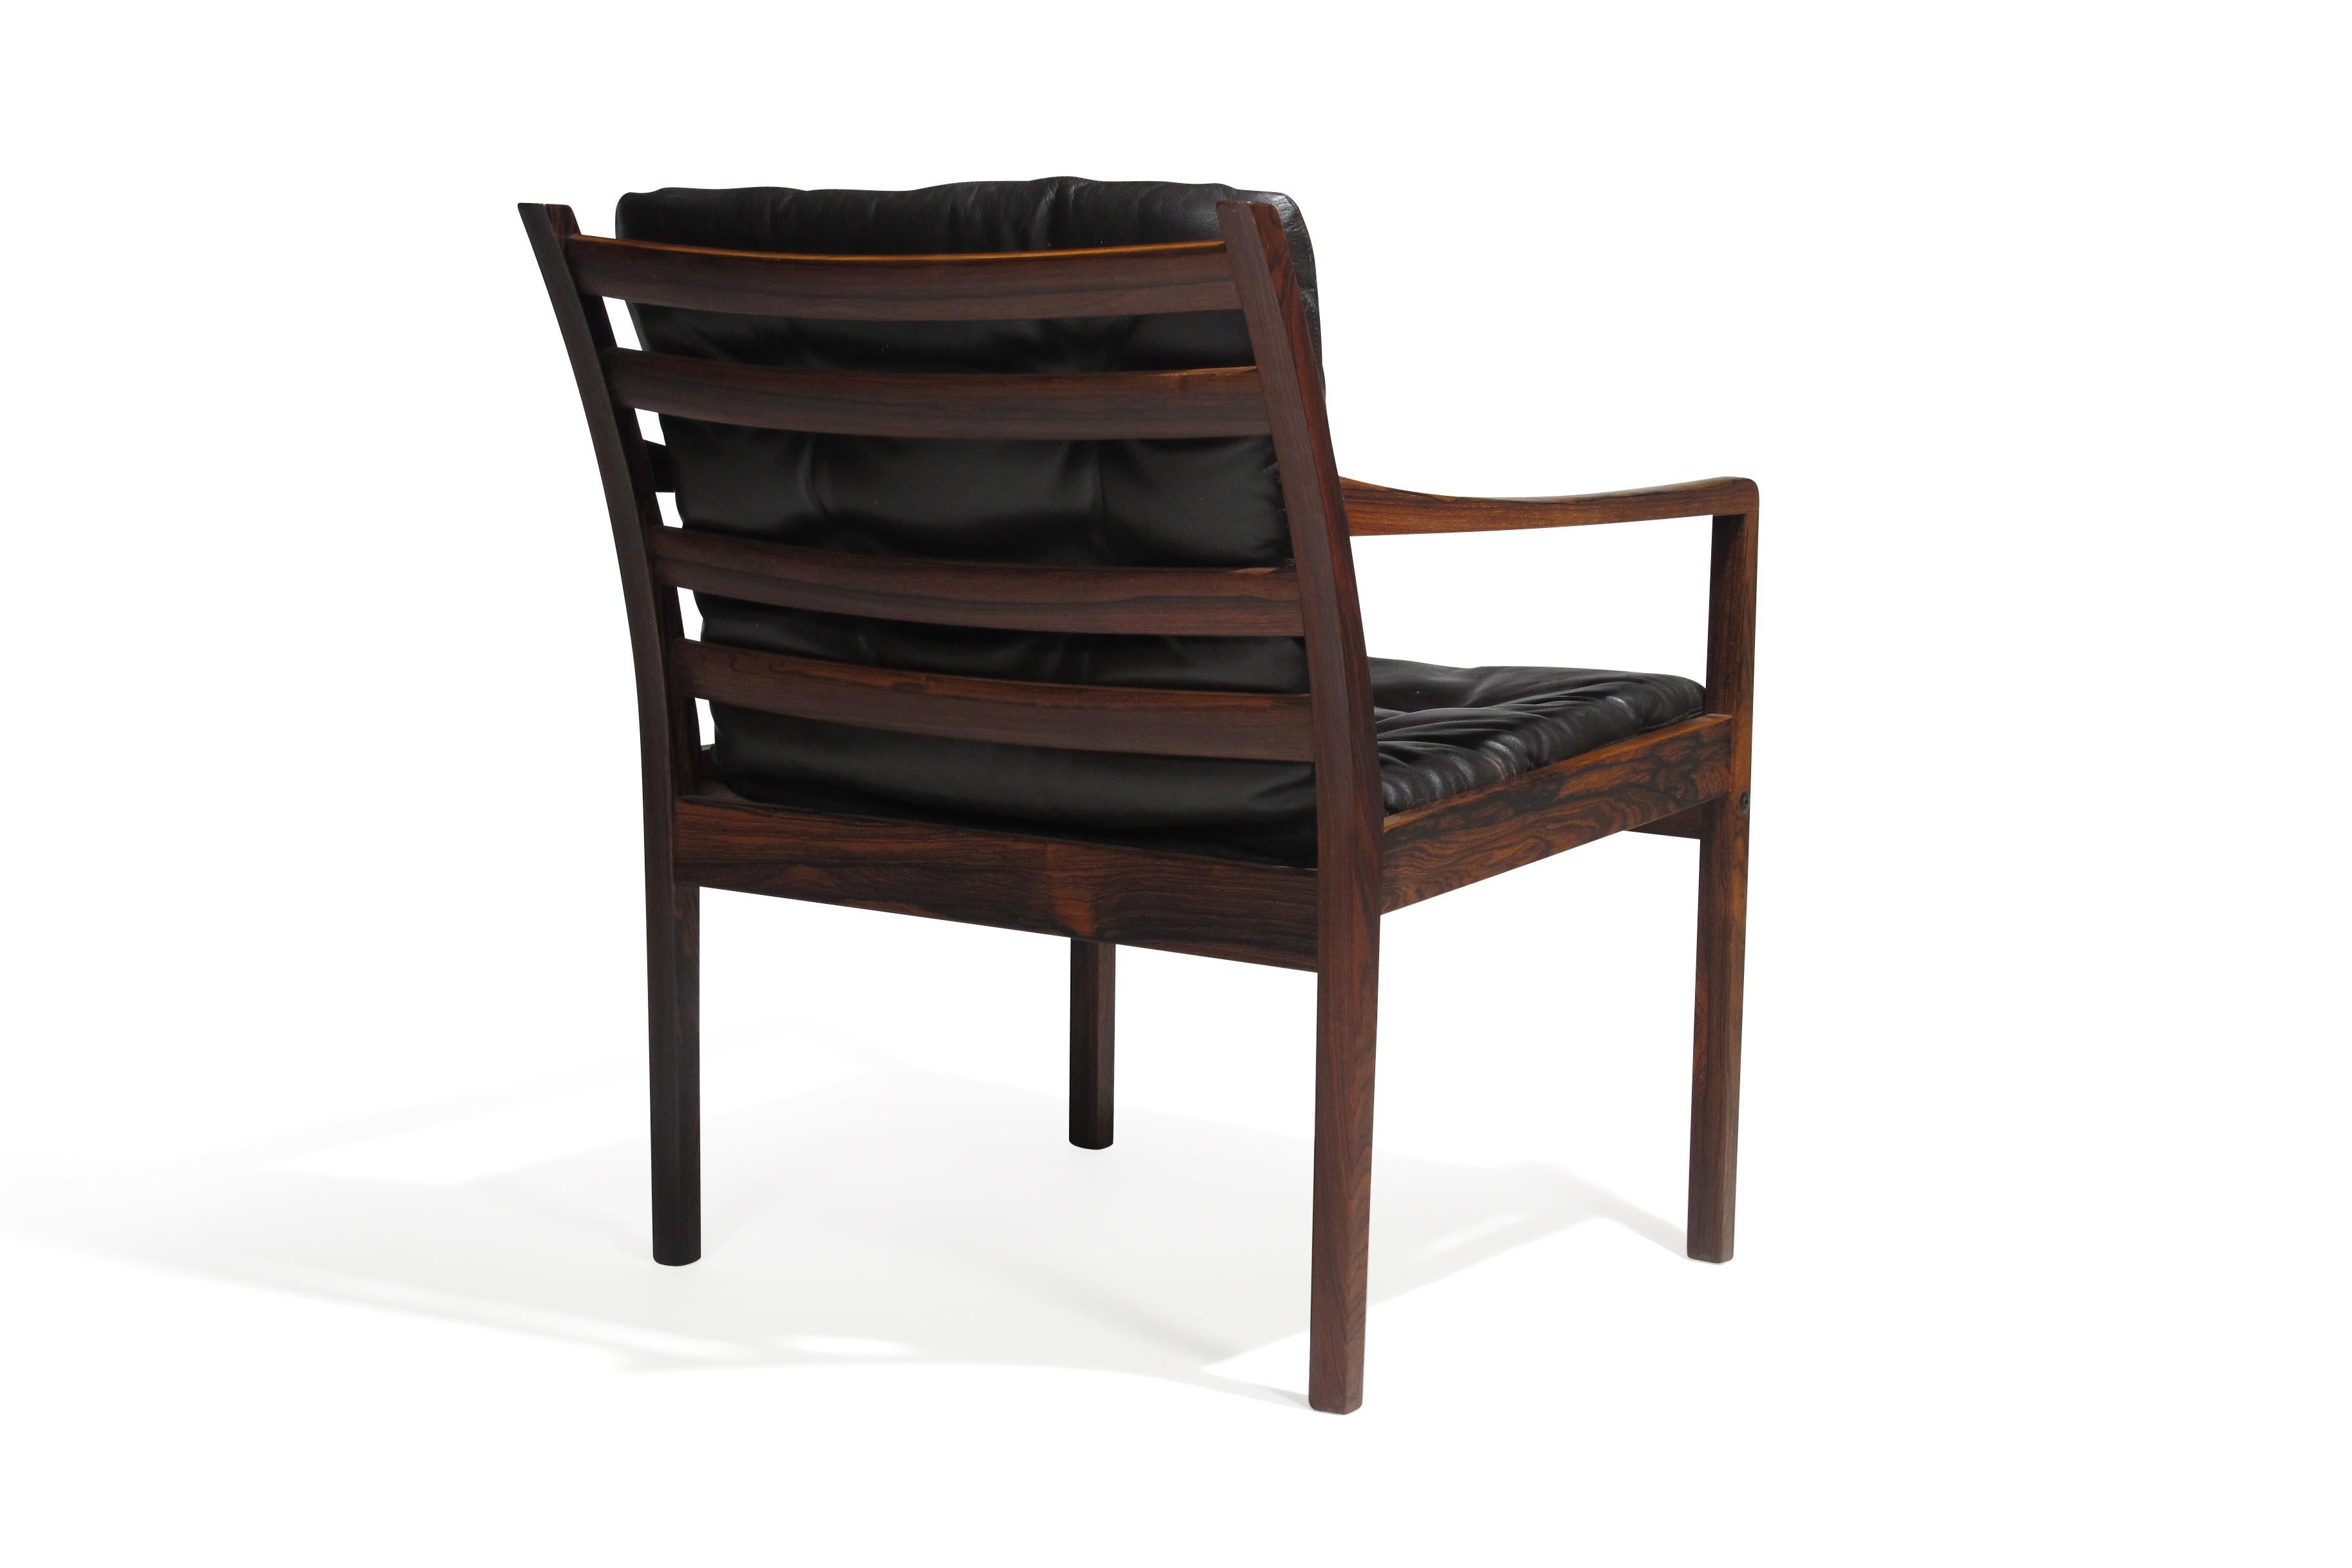 Oiled Ole Wanscher Rosewood Lounge Chairs in Original Leather